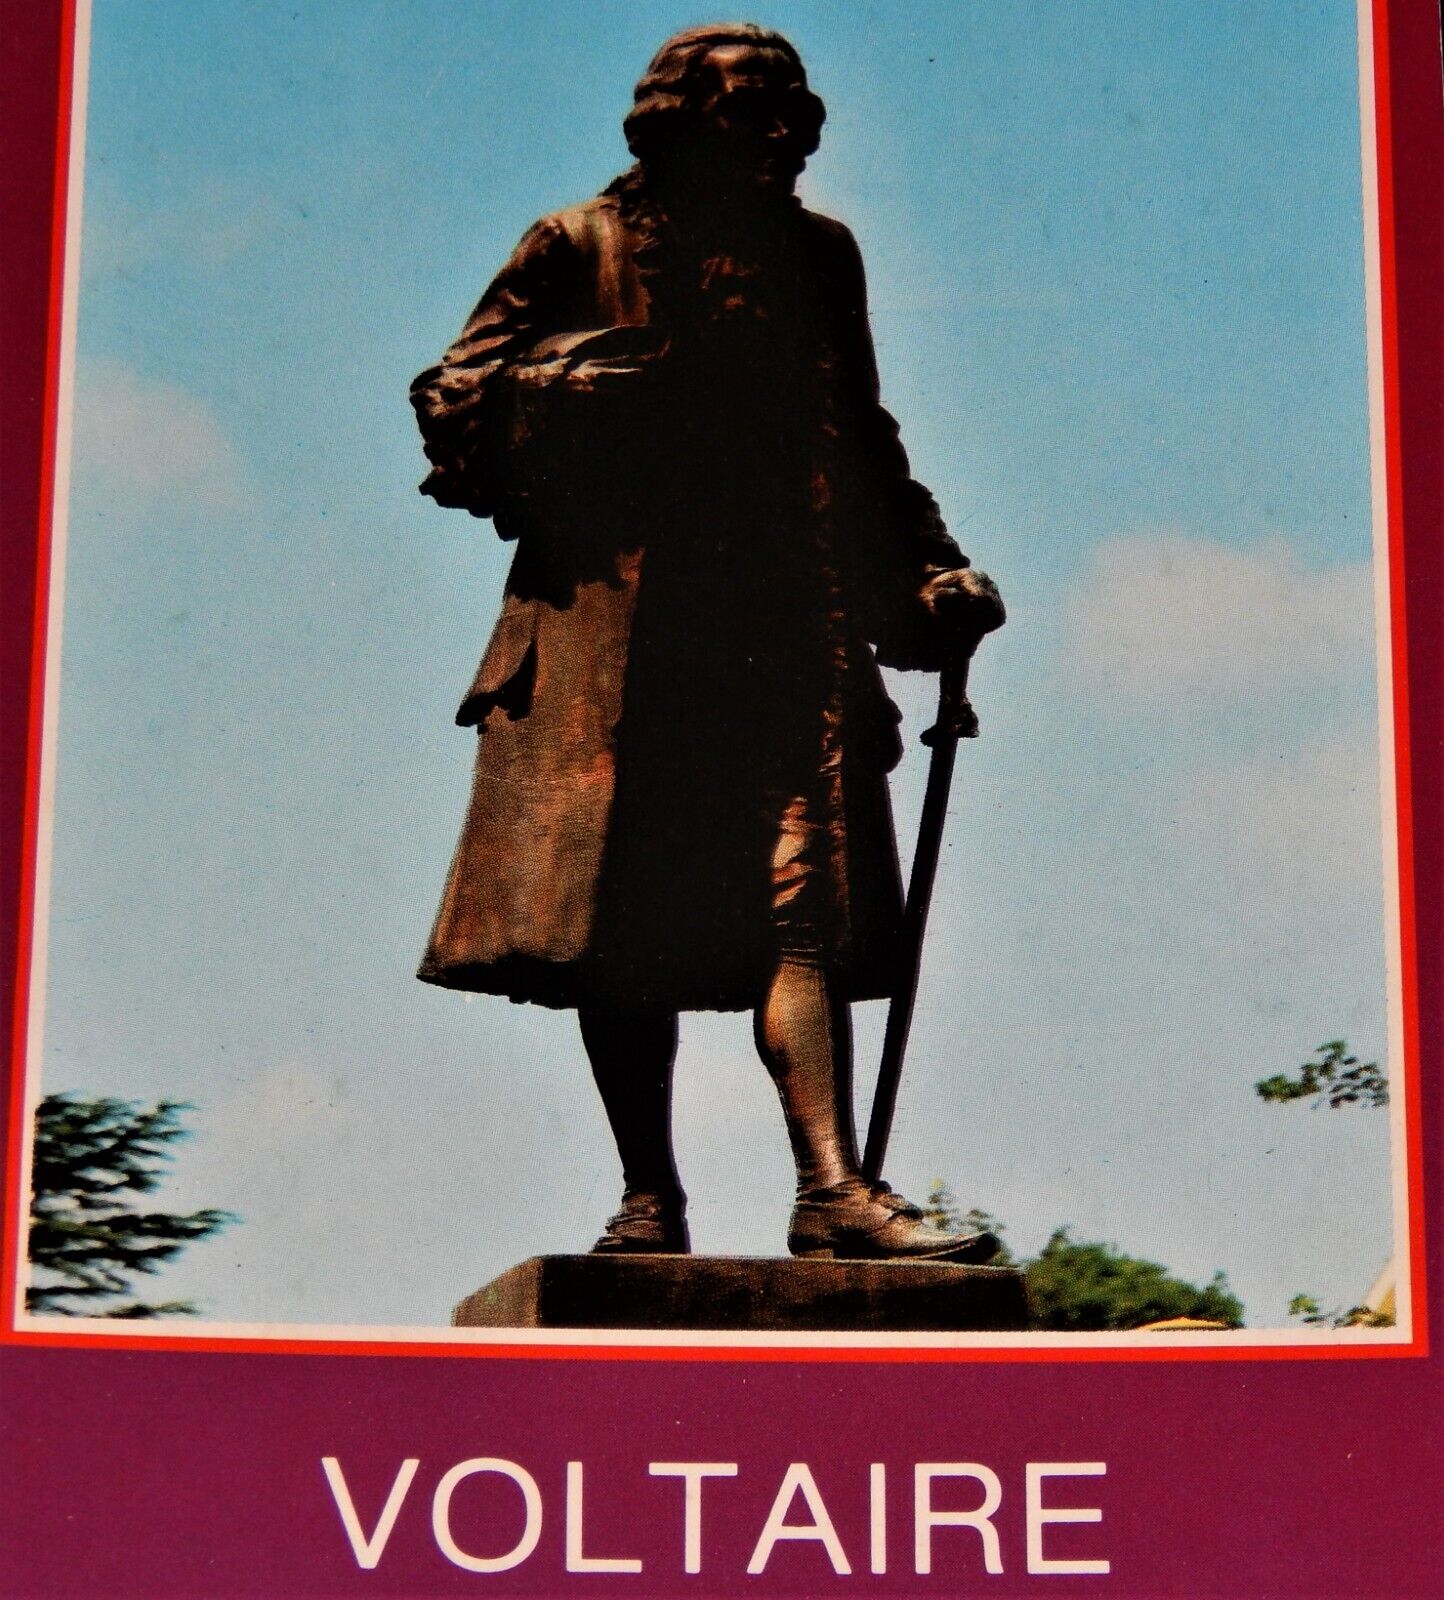 Vintage Postcard, FERNY-VOLTAIRE, FRANCE, Voltaire Statue, French Enlightenment